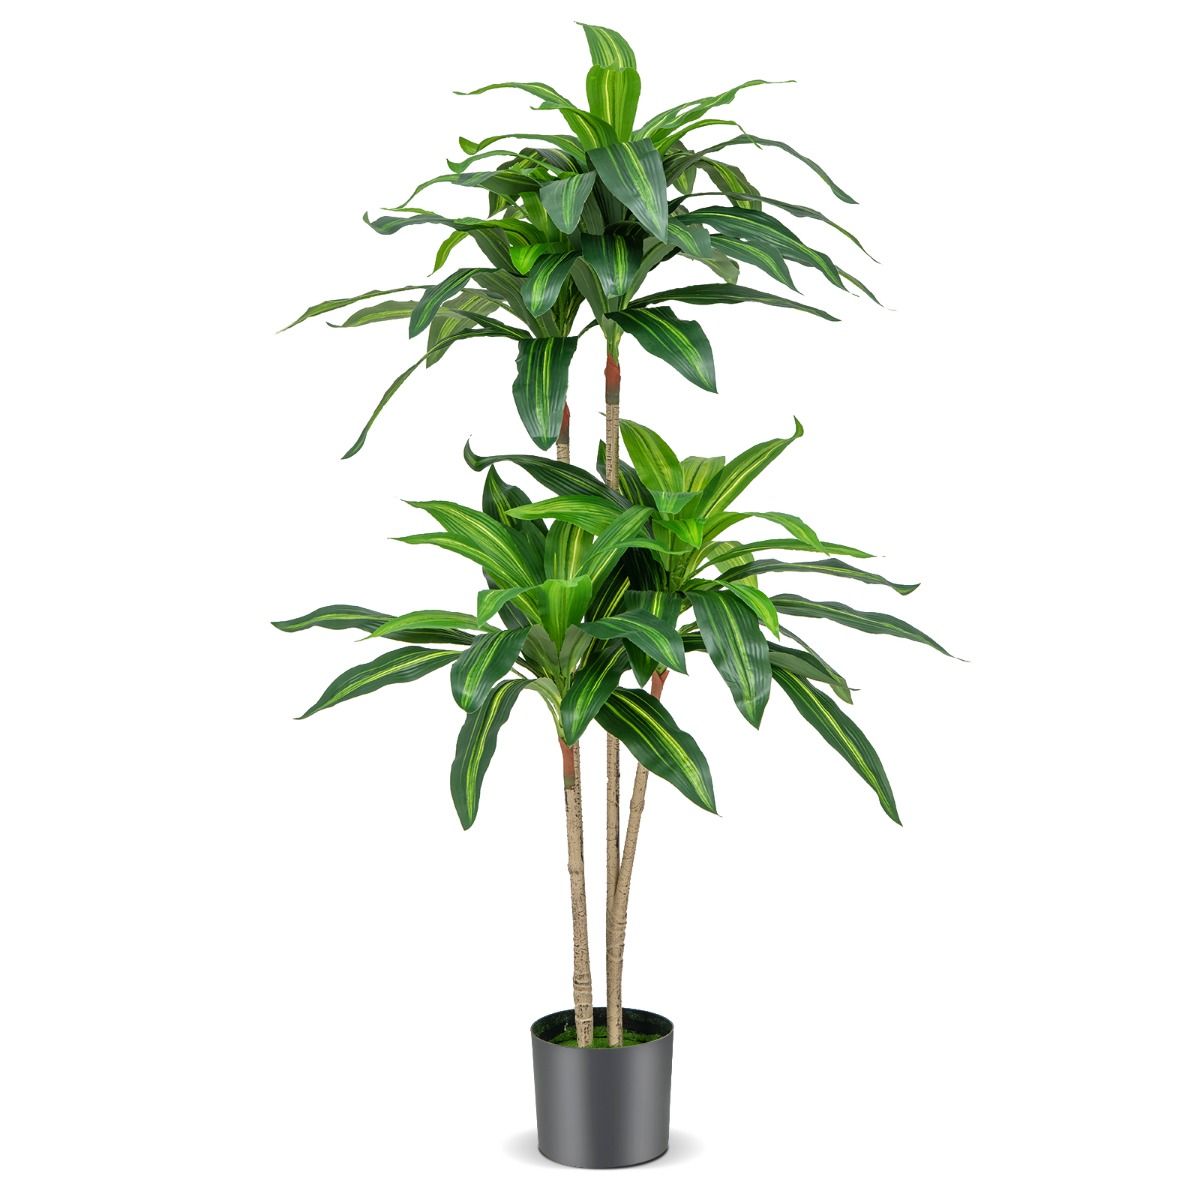 140cm Tall Fake Dracaena Plant with 92 Leaves and Built-in Cement Pot